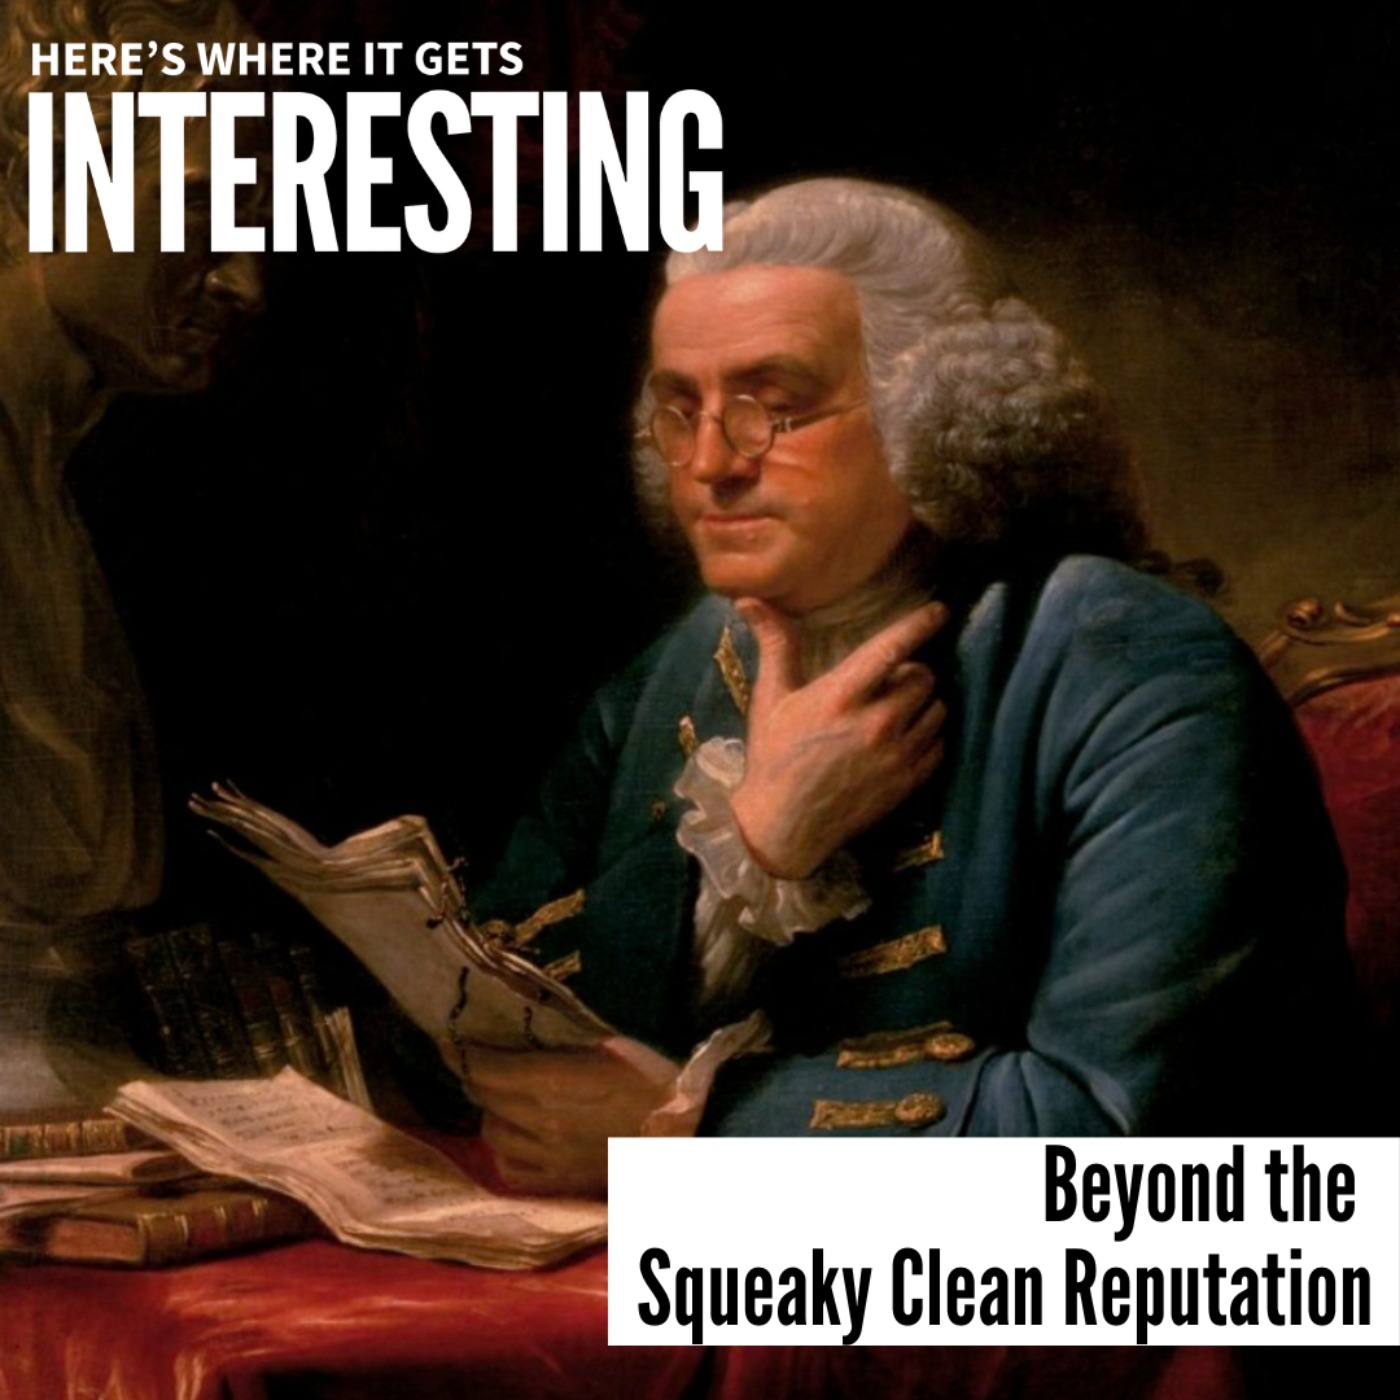 Ben Franklin: Beyond the Squeaky Clean Reputation